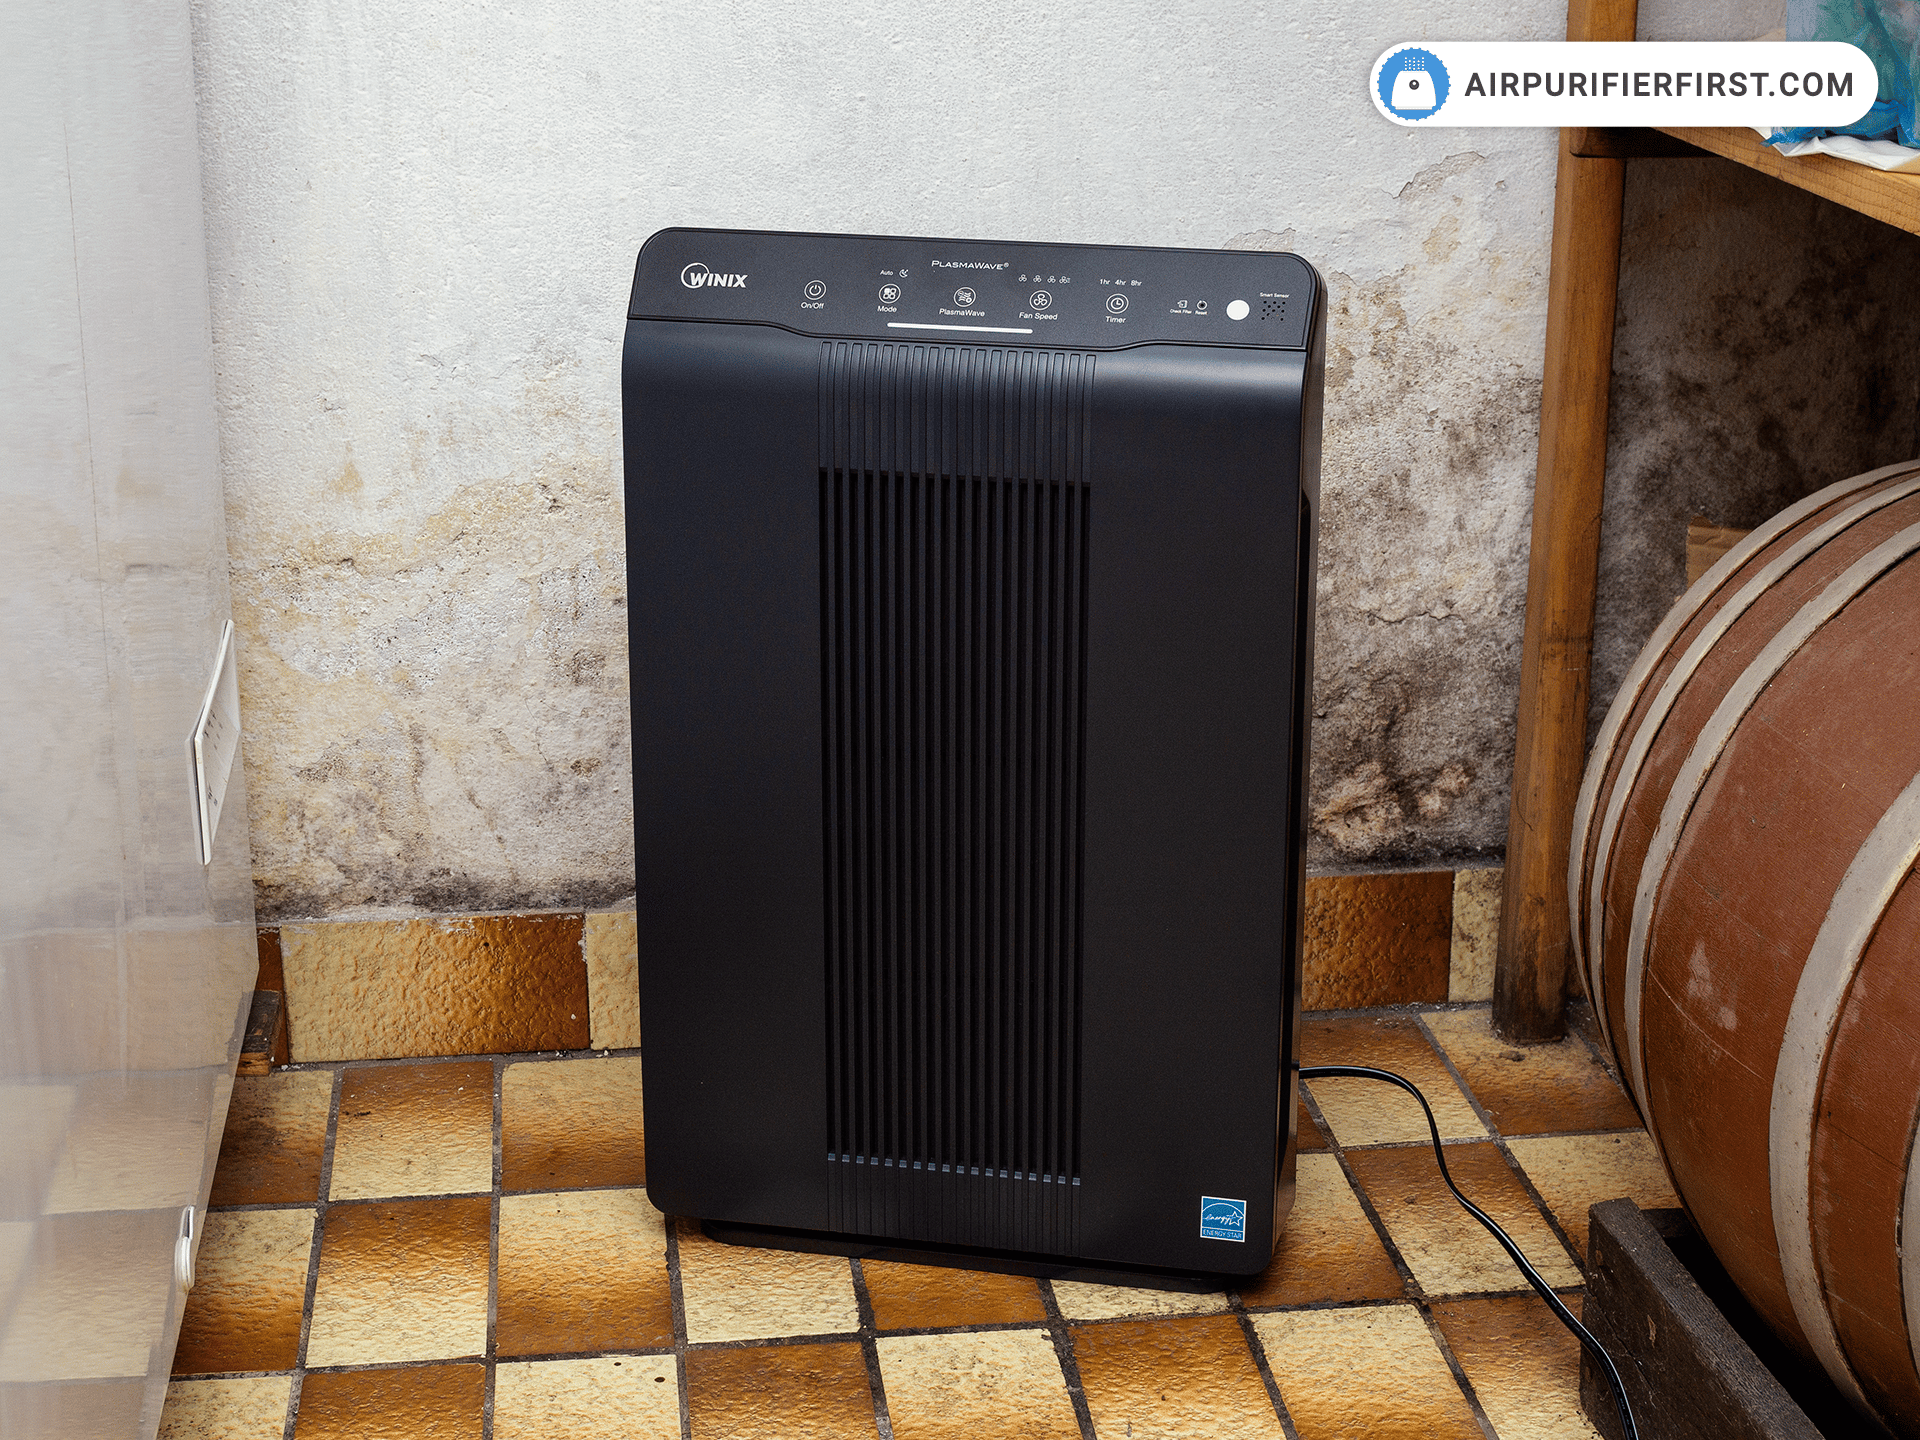 Winix 5500-2 - Best Air Purifiers For Mold